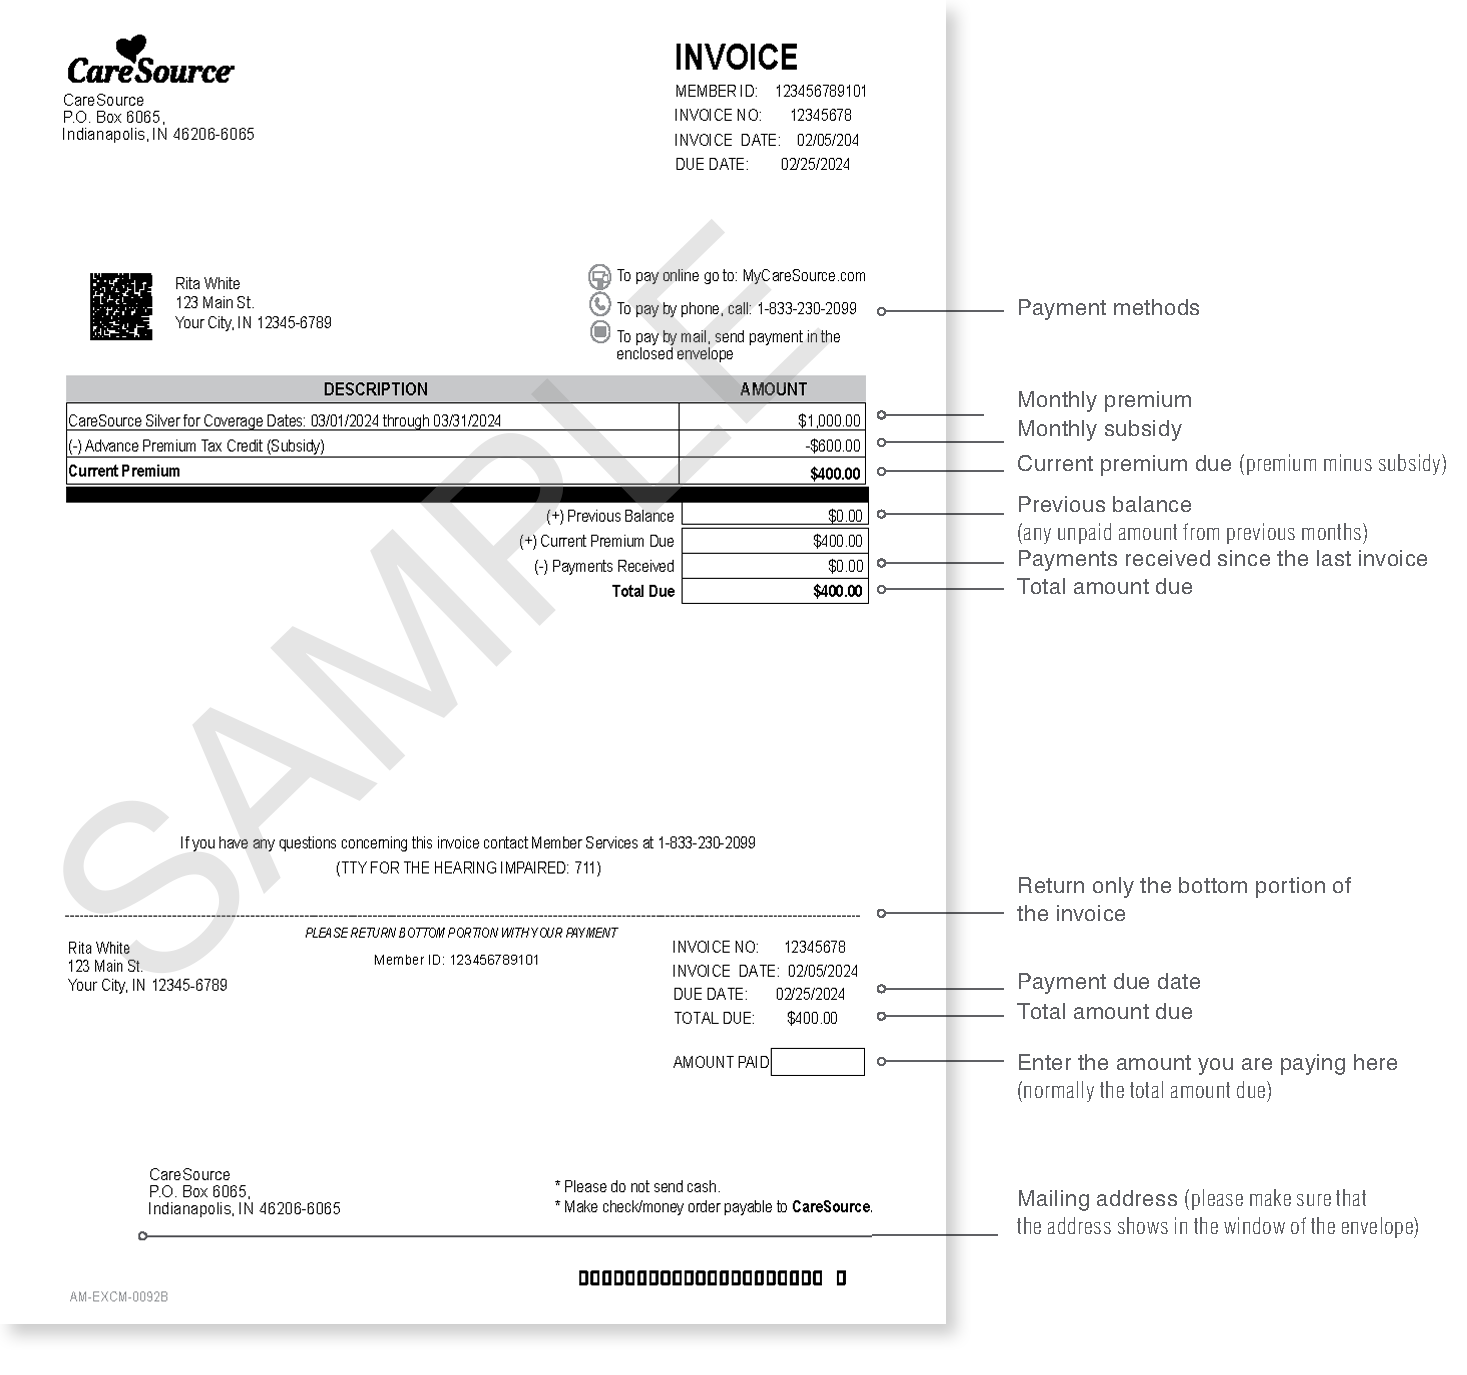 example of a CareSource invoice